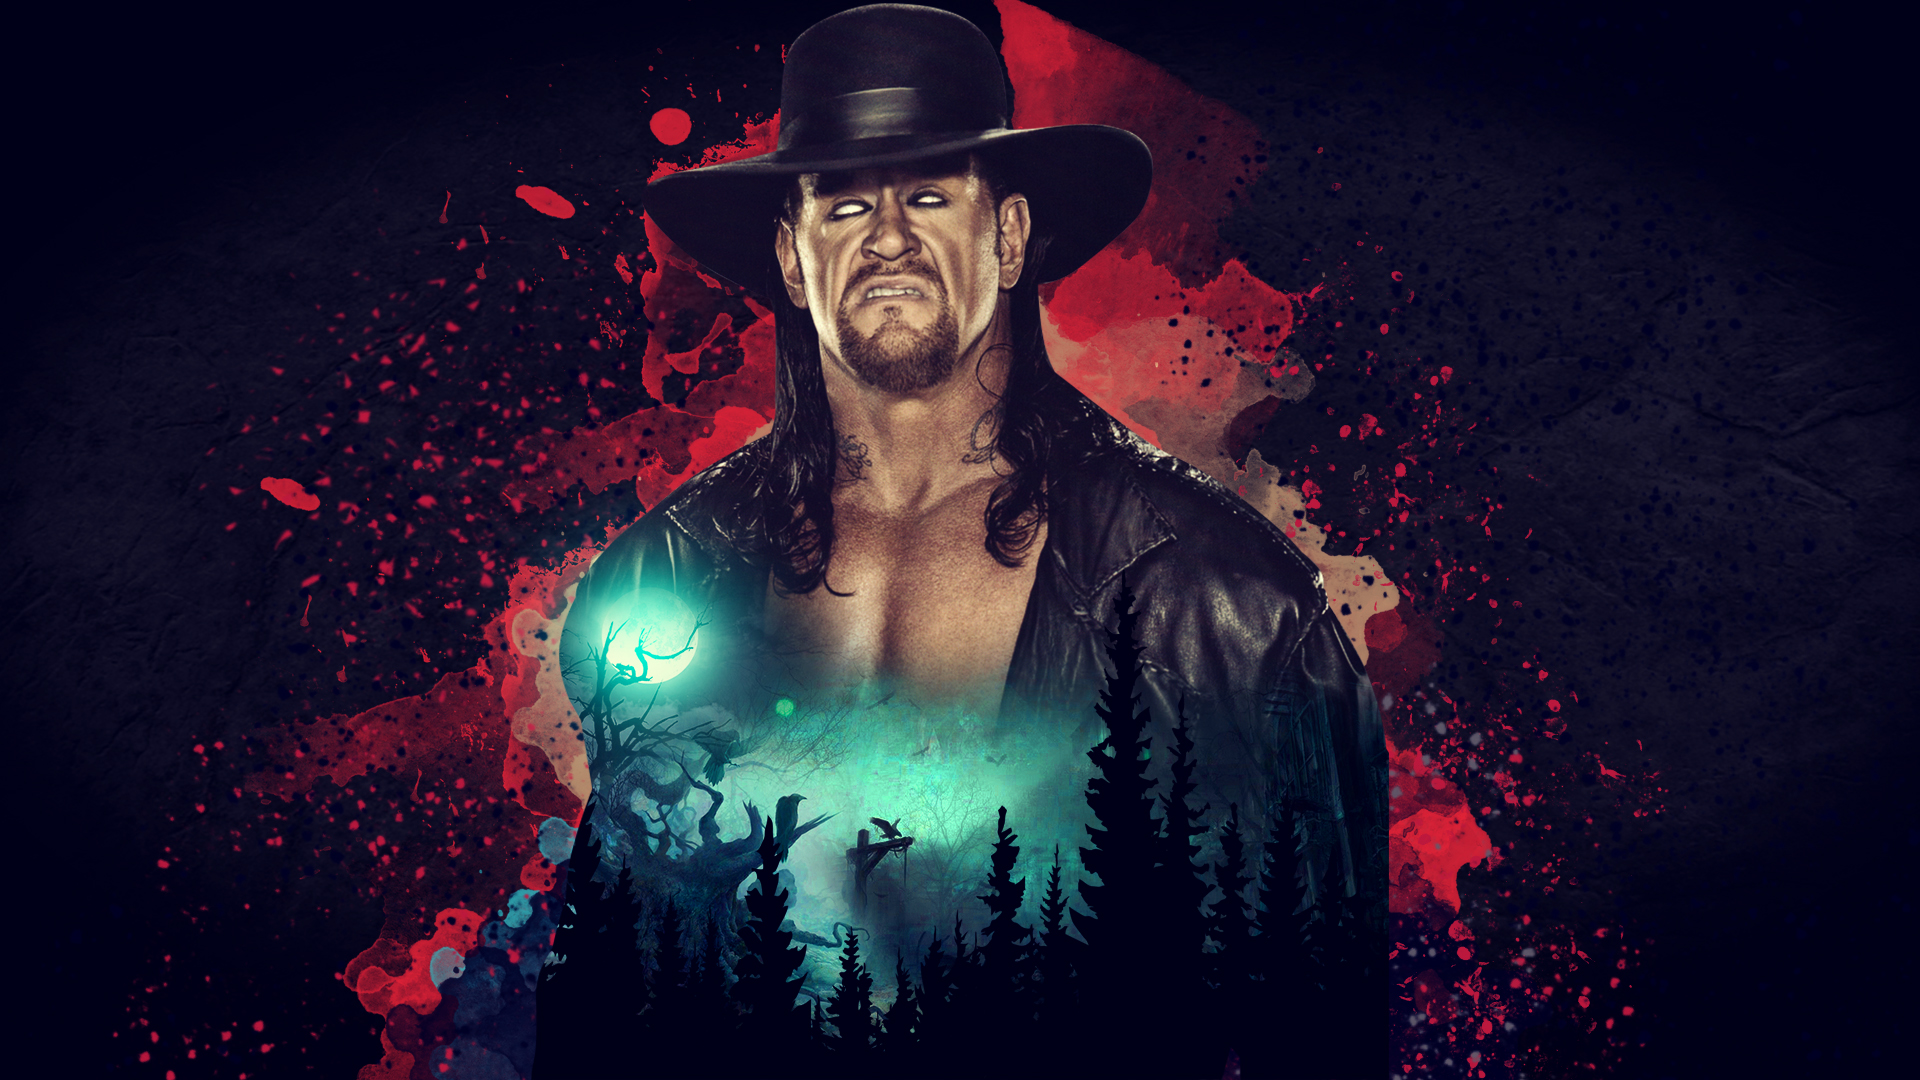 Free Download Pics Photos Wwe Undertaker Normal Undertaker Full Hd 1920x1080 For Your Desktop Mobile Tablet Explore 78 Wwe Undertaker Wallpapers The Undertaker Wallpaper Wwe Wallpaper For Computer Wwe